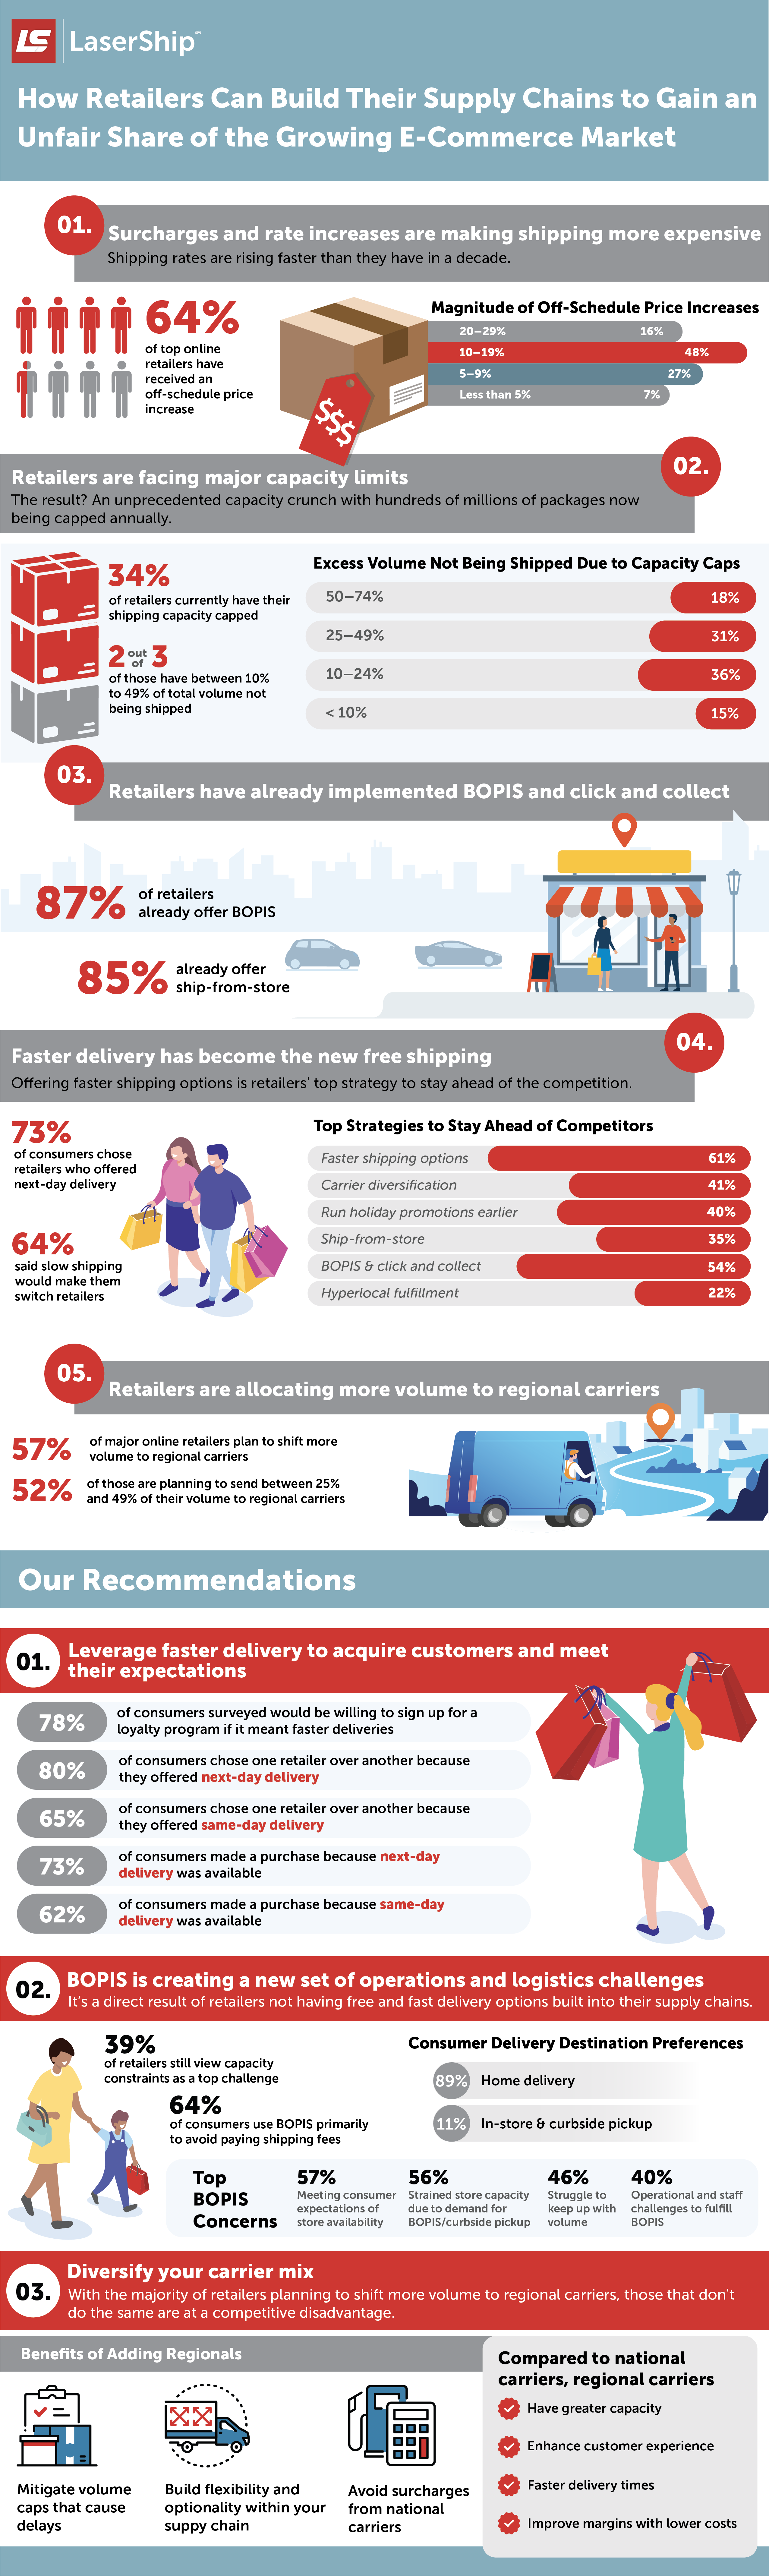 Infographic: How Retailers Can Build Their Supply Chains to Gain an Unfair Share of the Growing E-Commerce Market